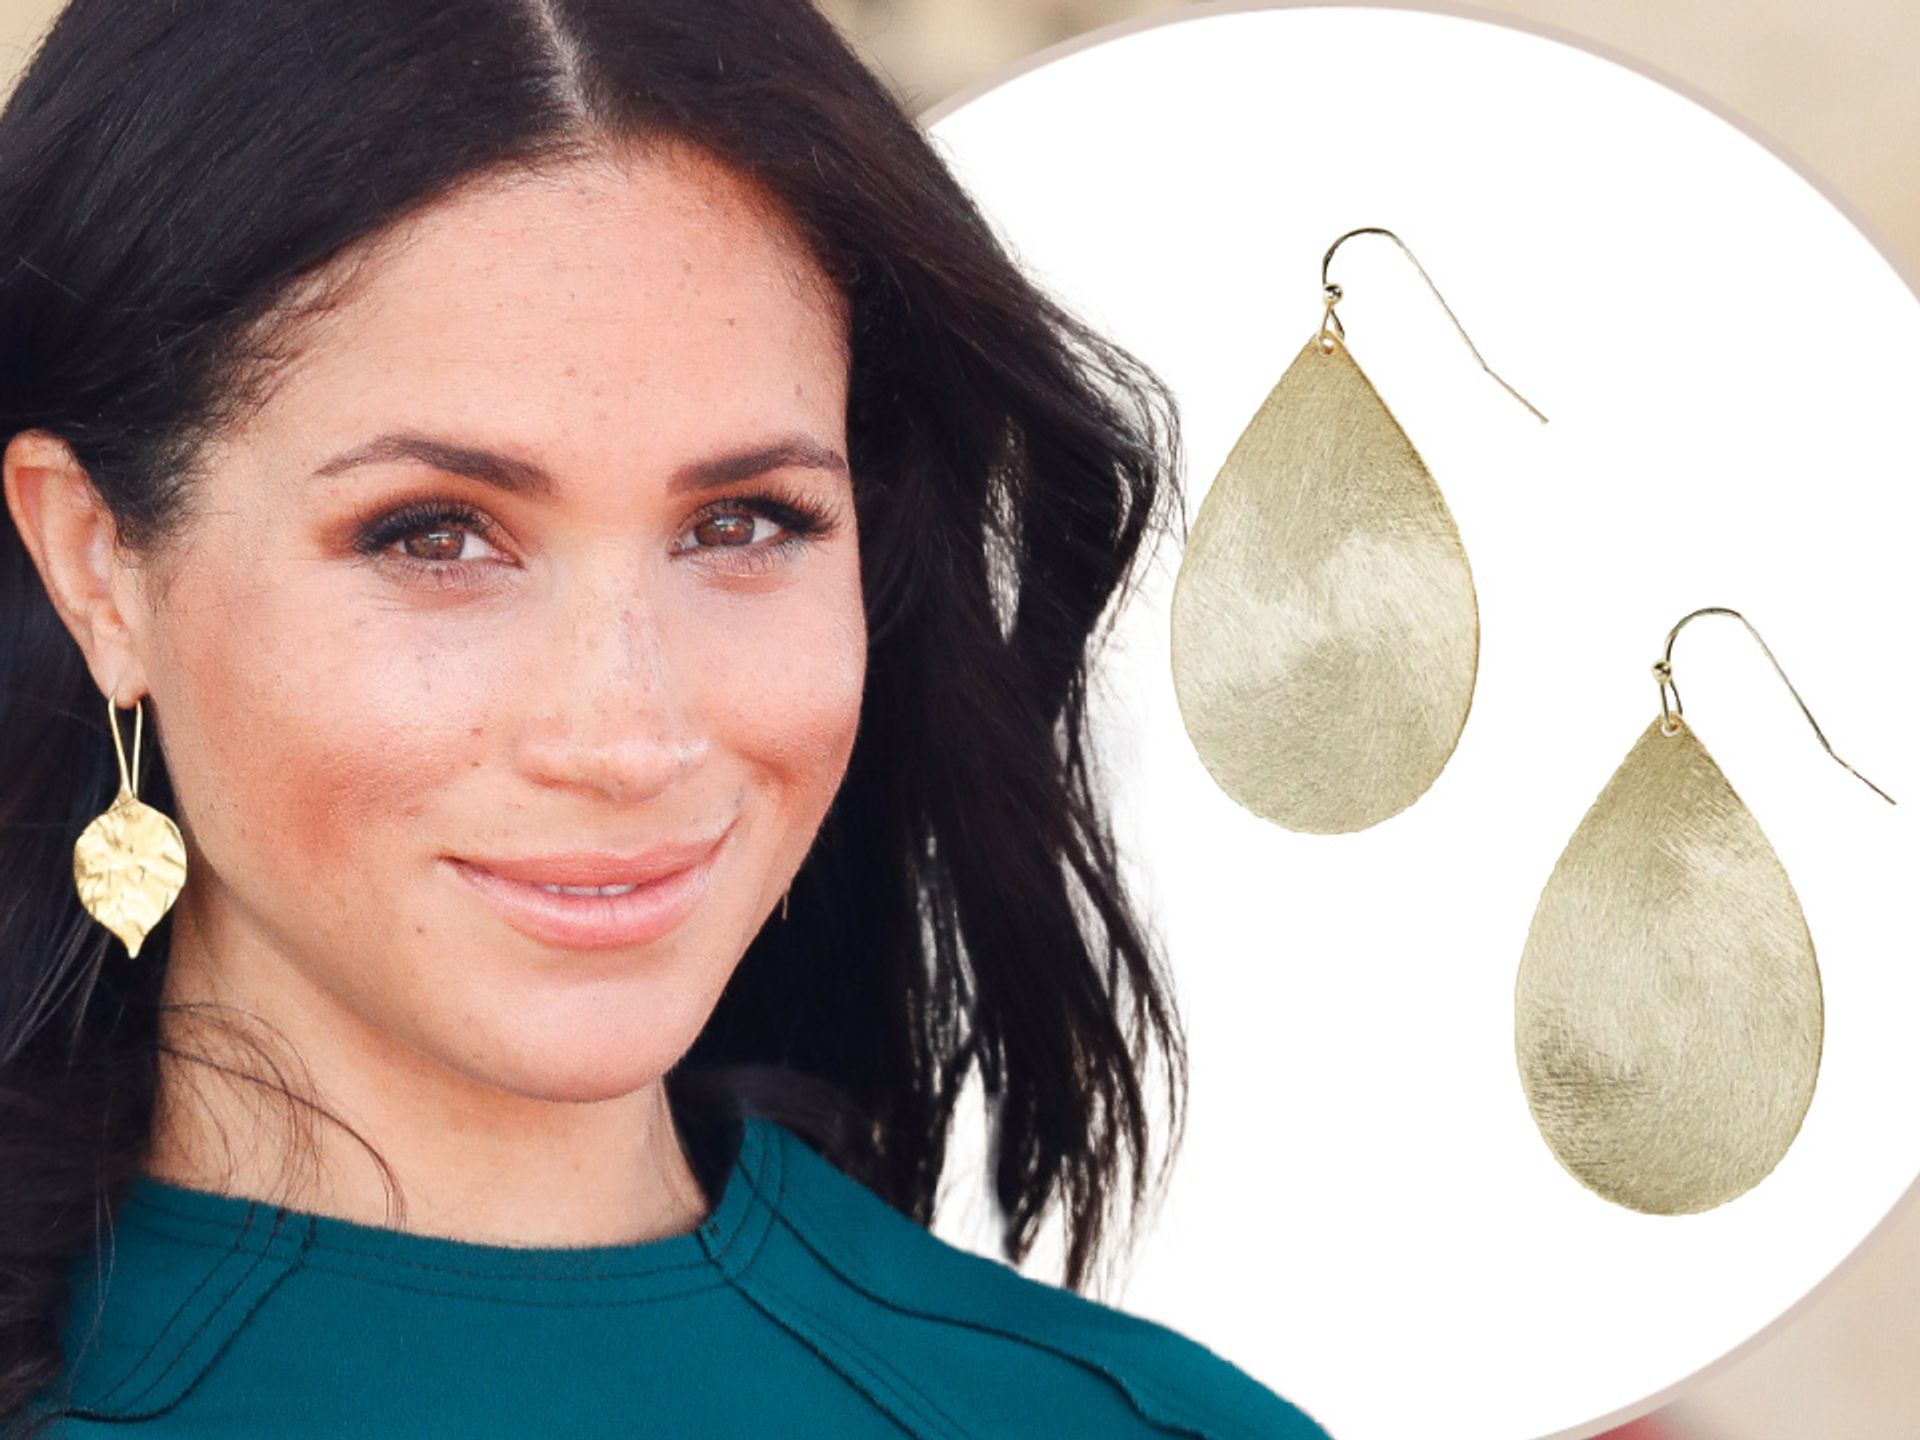 Meghan Markle Just Wore a Chic Pair of $22 Hoop Earrings From